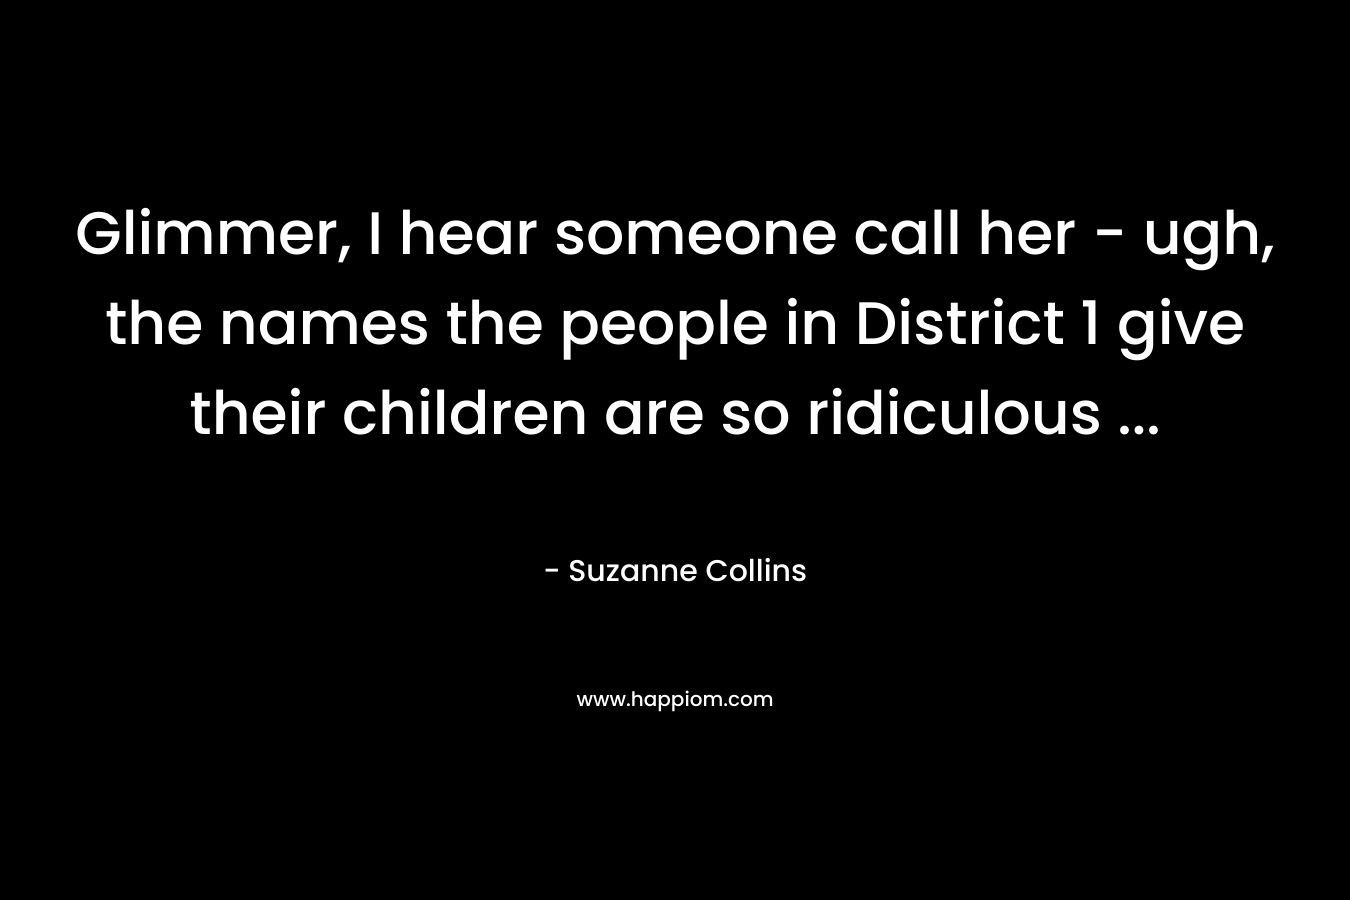 Glimmer, I hear someone call her – ugh, the names the people in District 1 give their children are so ridiculous … – Suzanne Collins